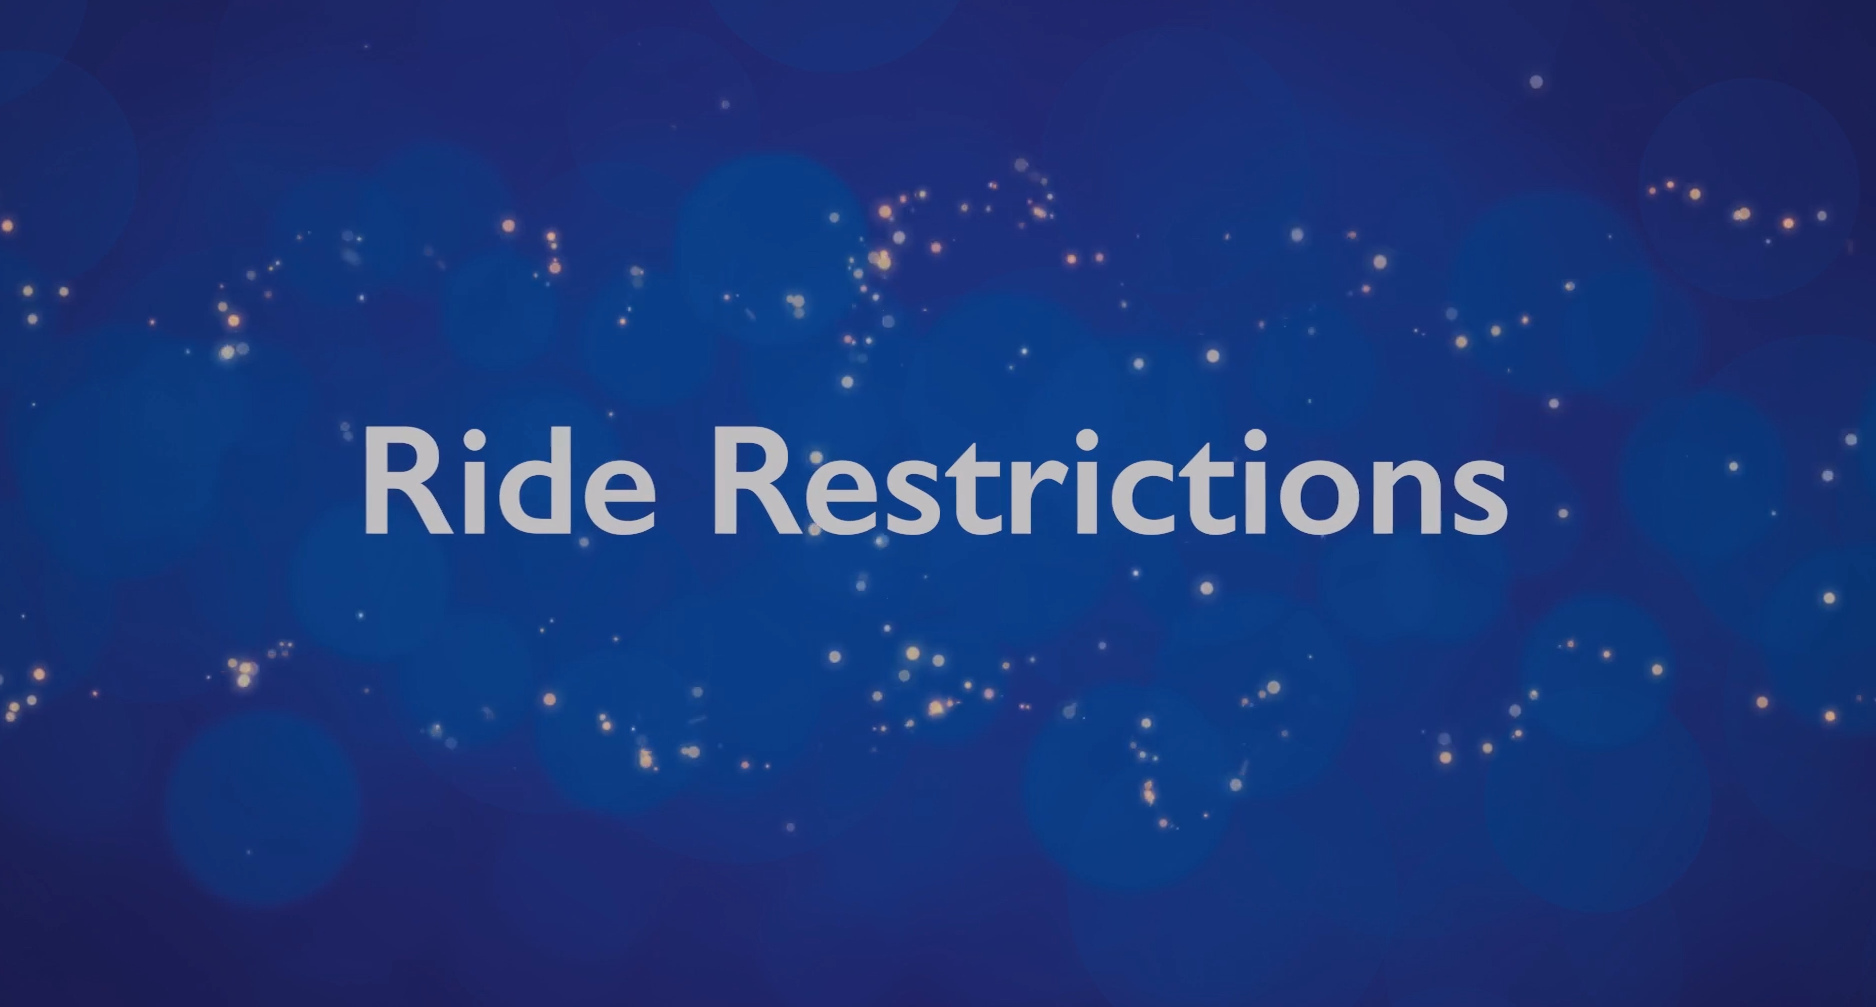 Ride Restrictions - Merlin Entertainments Accessibility Video